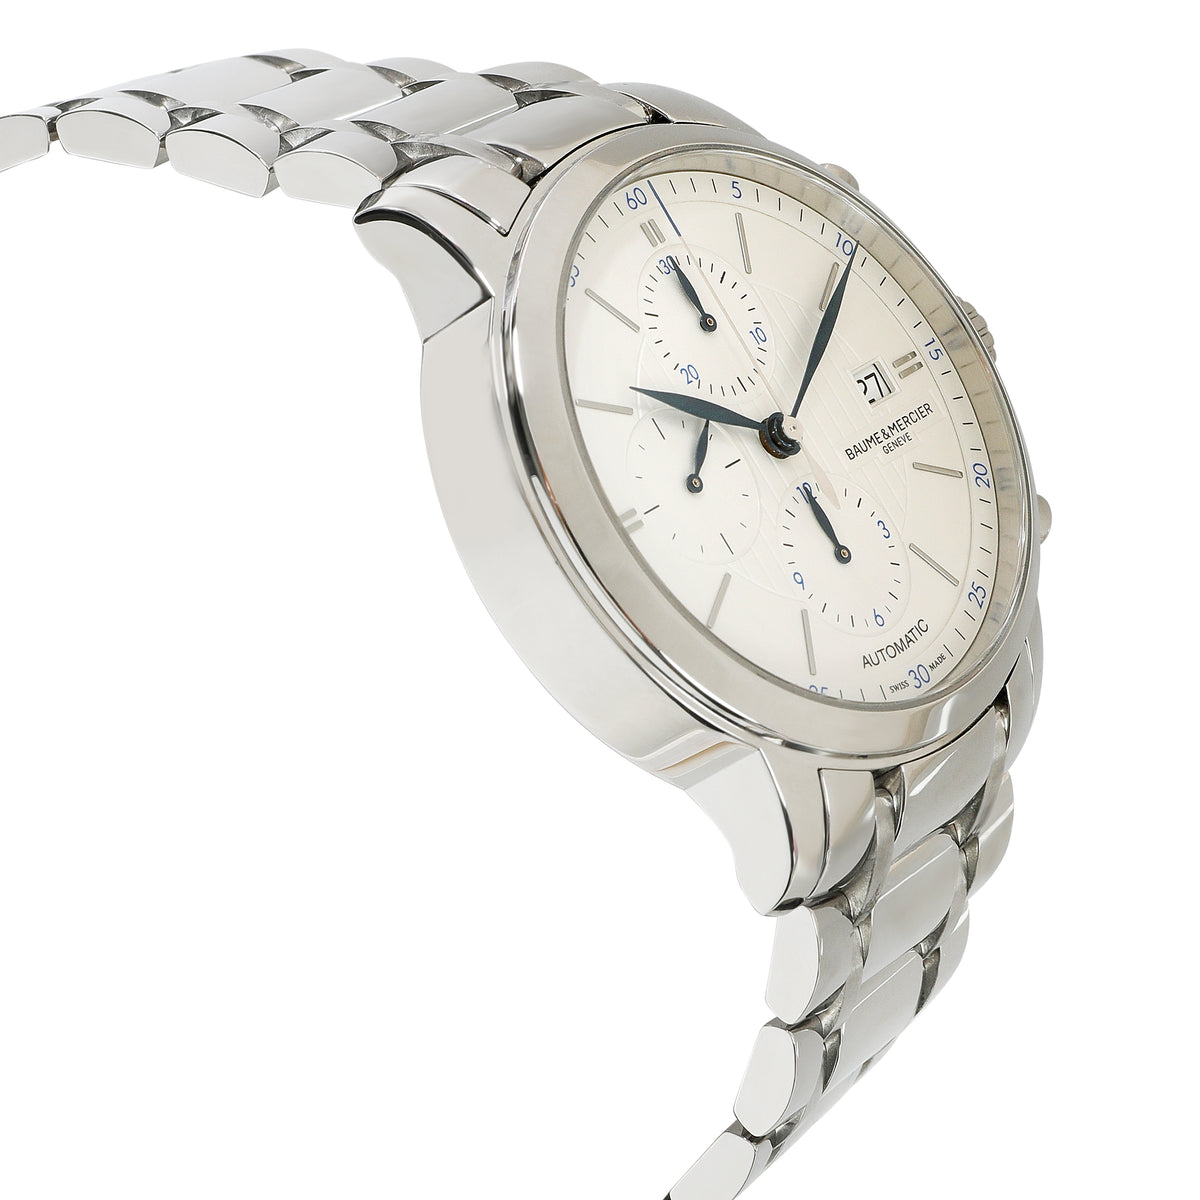 Classima MOA10331 Men's Watch in  Stainless Steel